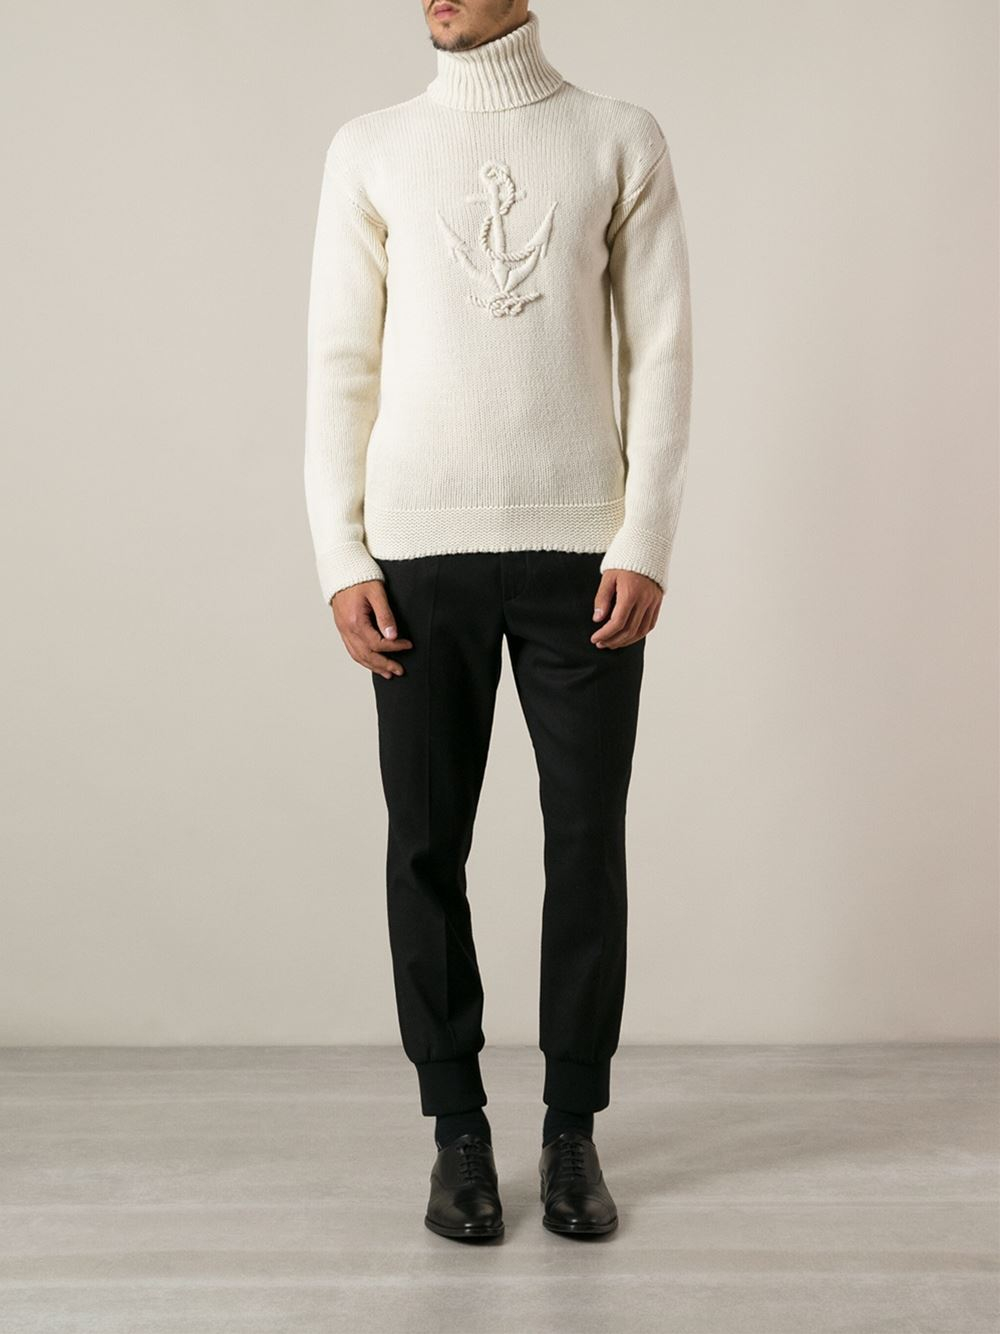 Lyst - Façonnable Anchor Embroidered Sweater in White for Men